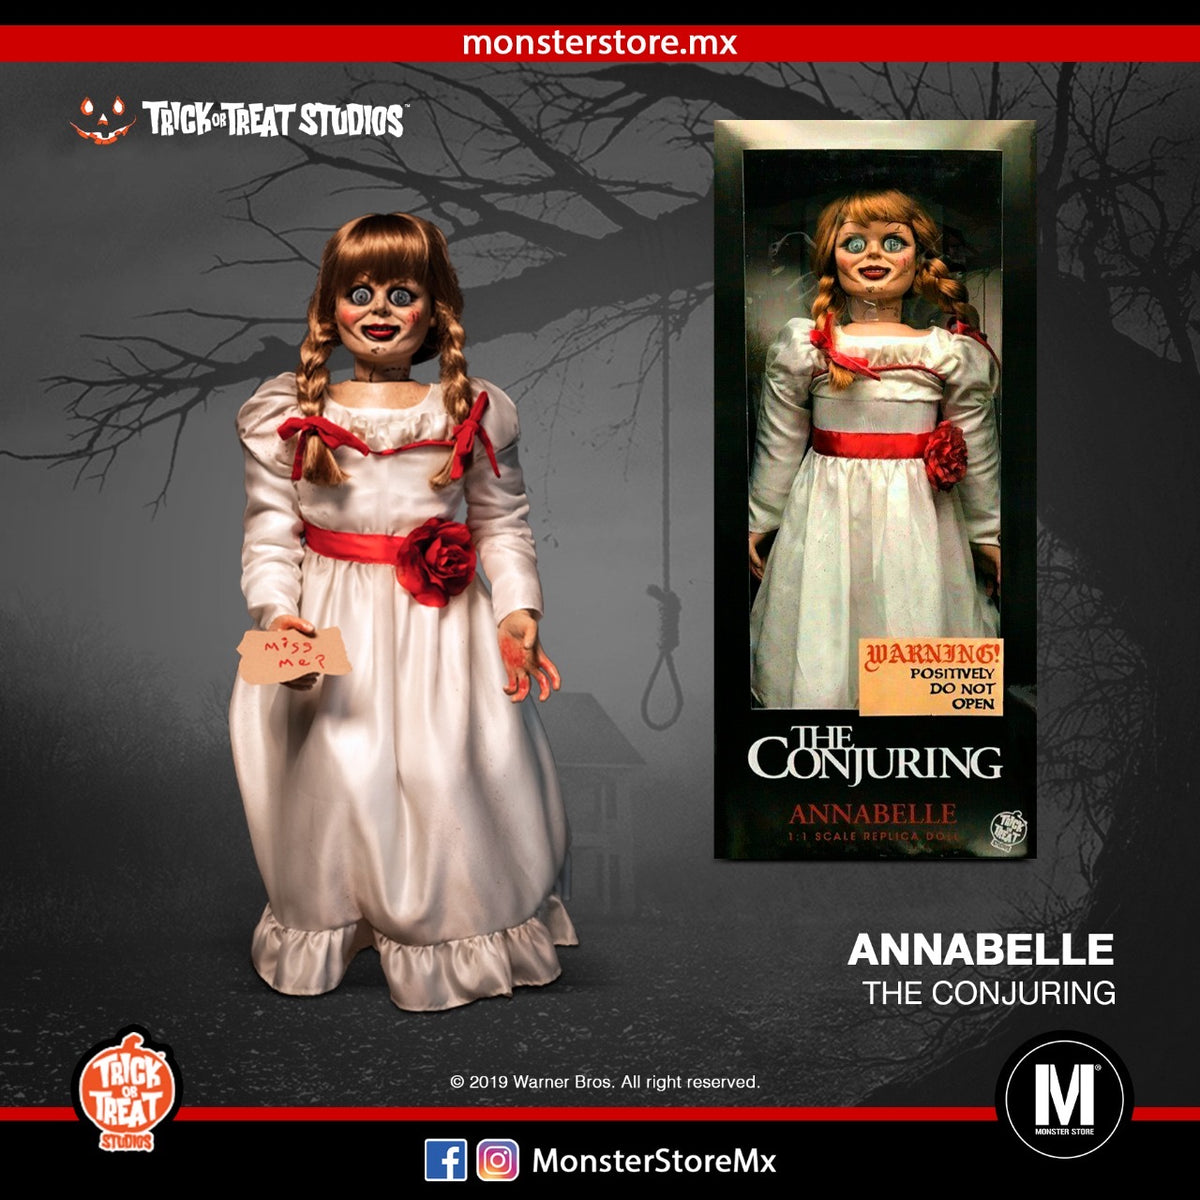 The Conjuring - ANNABELLE 1:1 Scale Replica Doll Trick or Treat Studios -  LIBERTY Toys